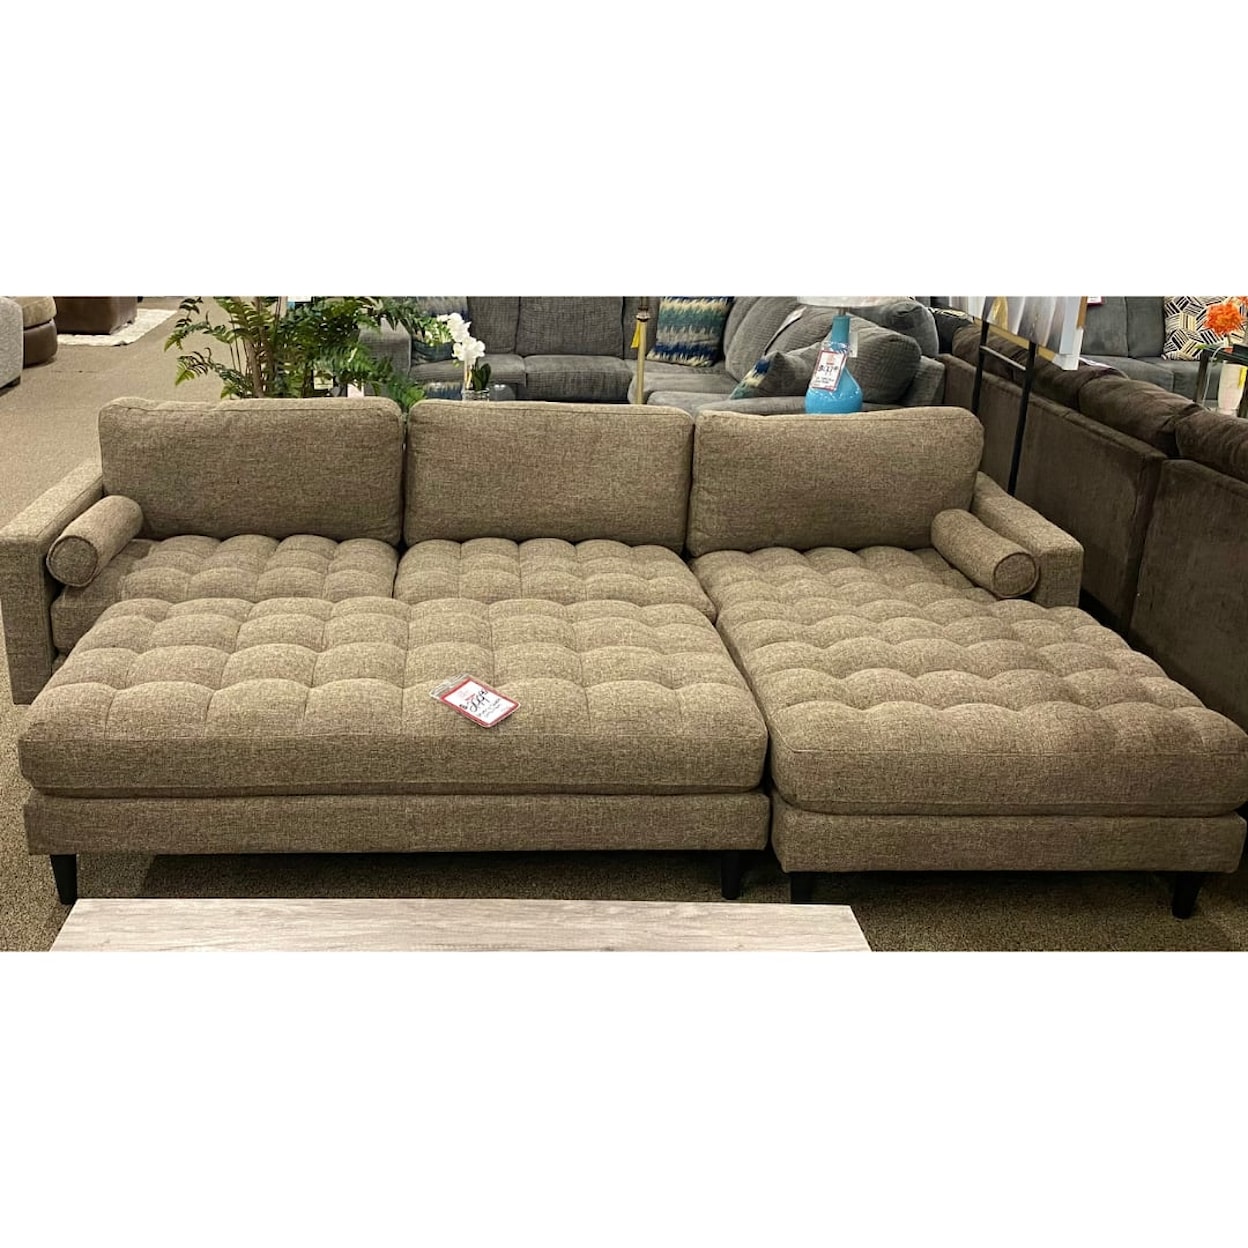 Lifestyle Beverly BEVERLY SADDLE 2 PIECE SECTIONAL |